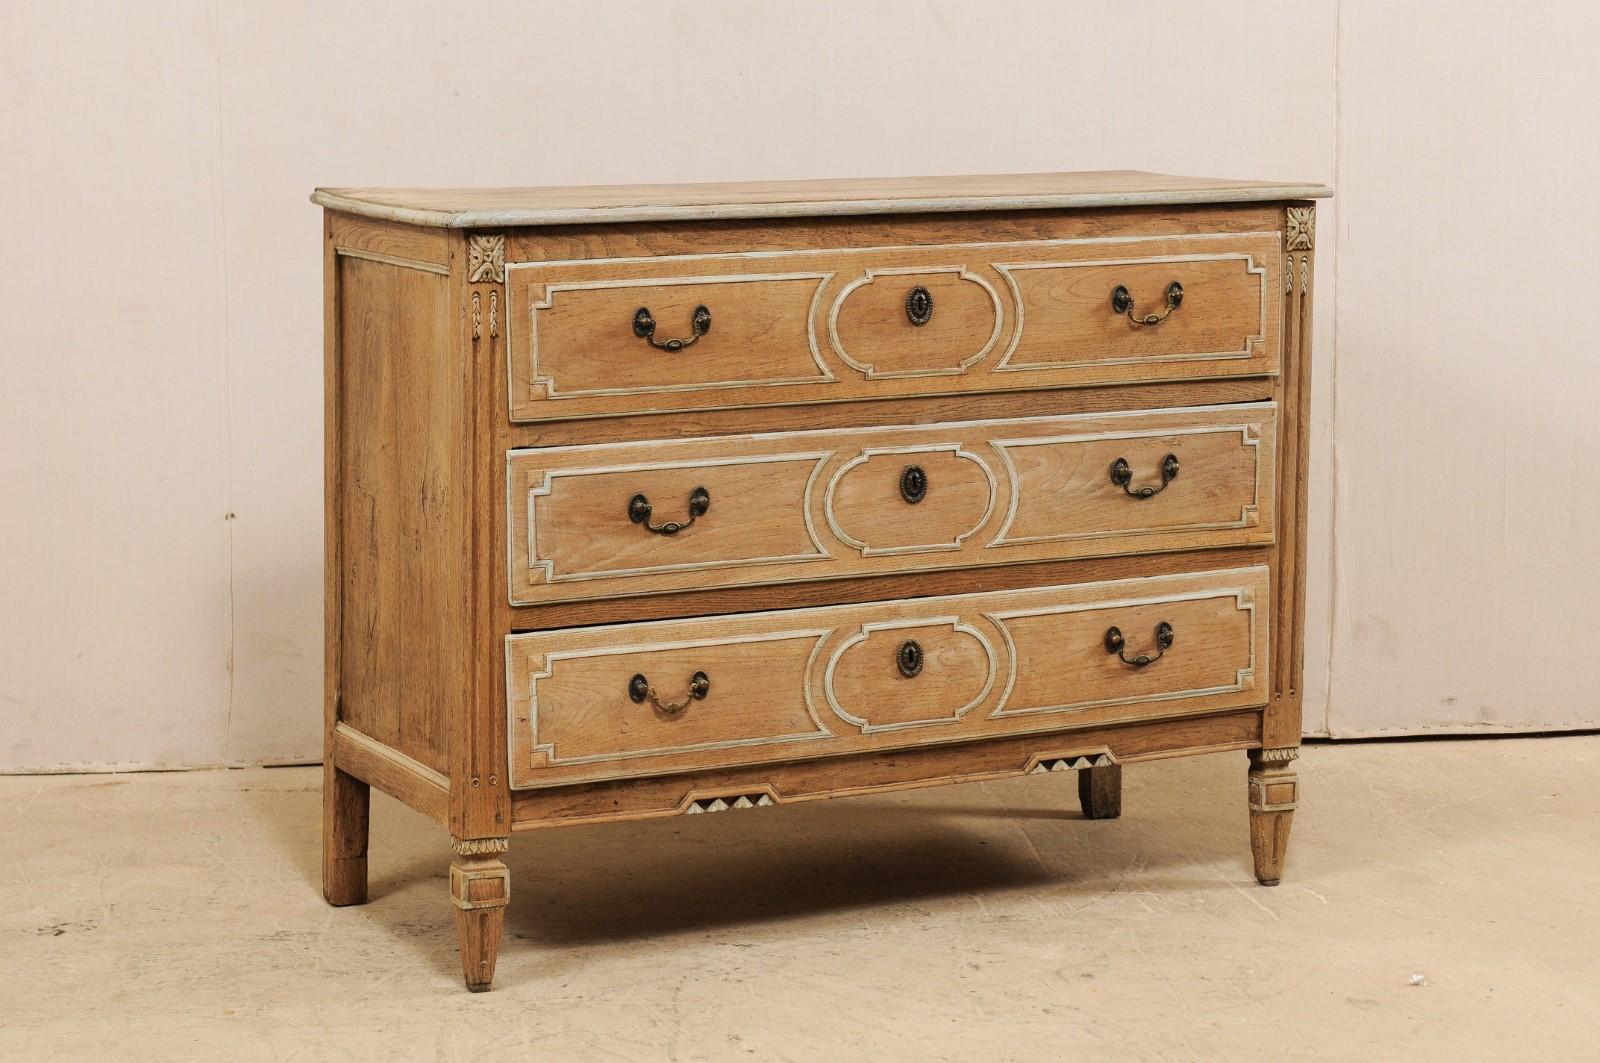 A beautiful 18th century French oak chest of three drawers. This antique chest from France features three decoratively panel carved front drawers, fluted front side posts, adorned in carved accents along side posts and center of it's skirt, and is